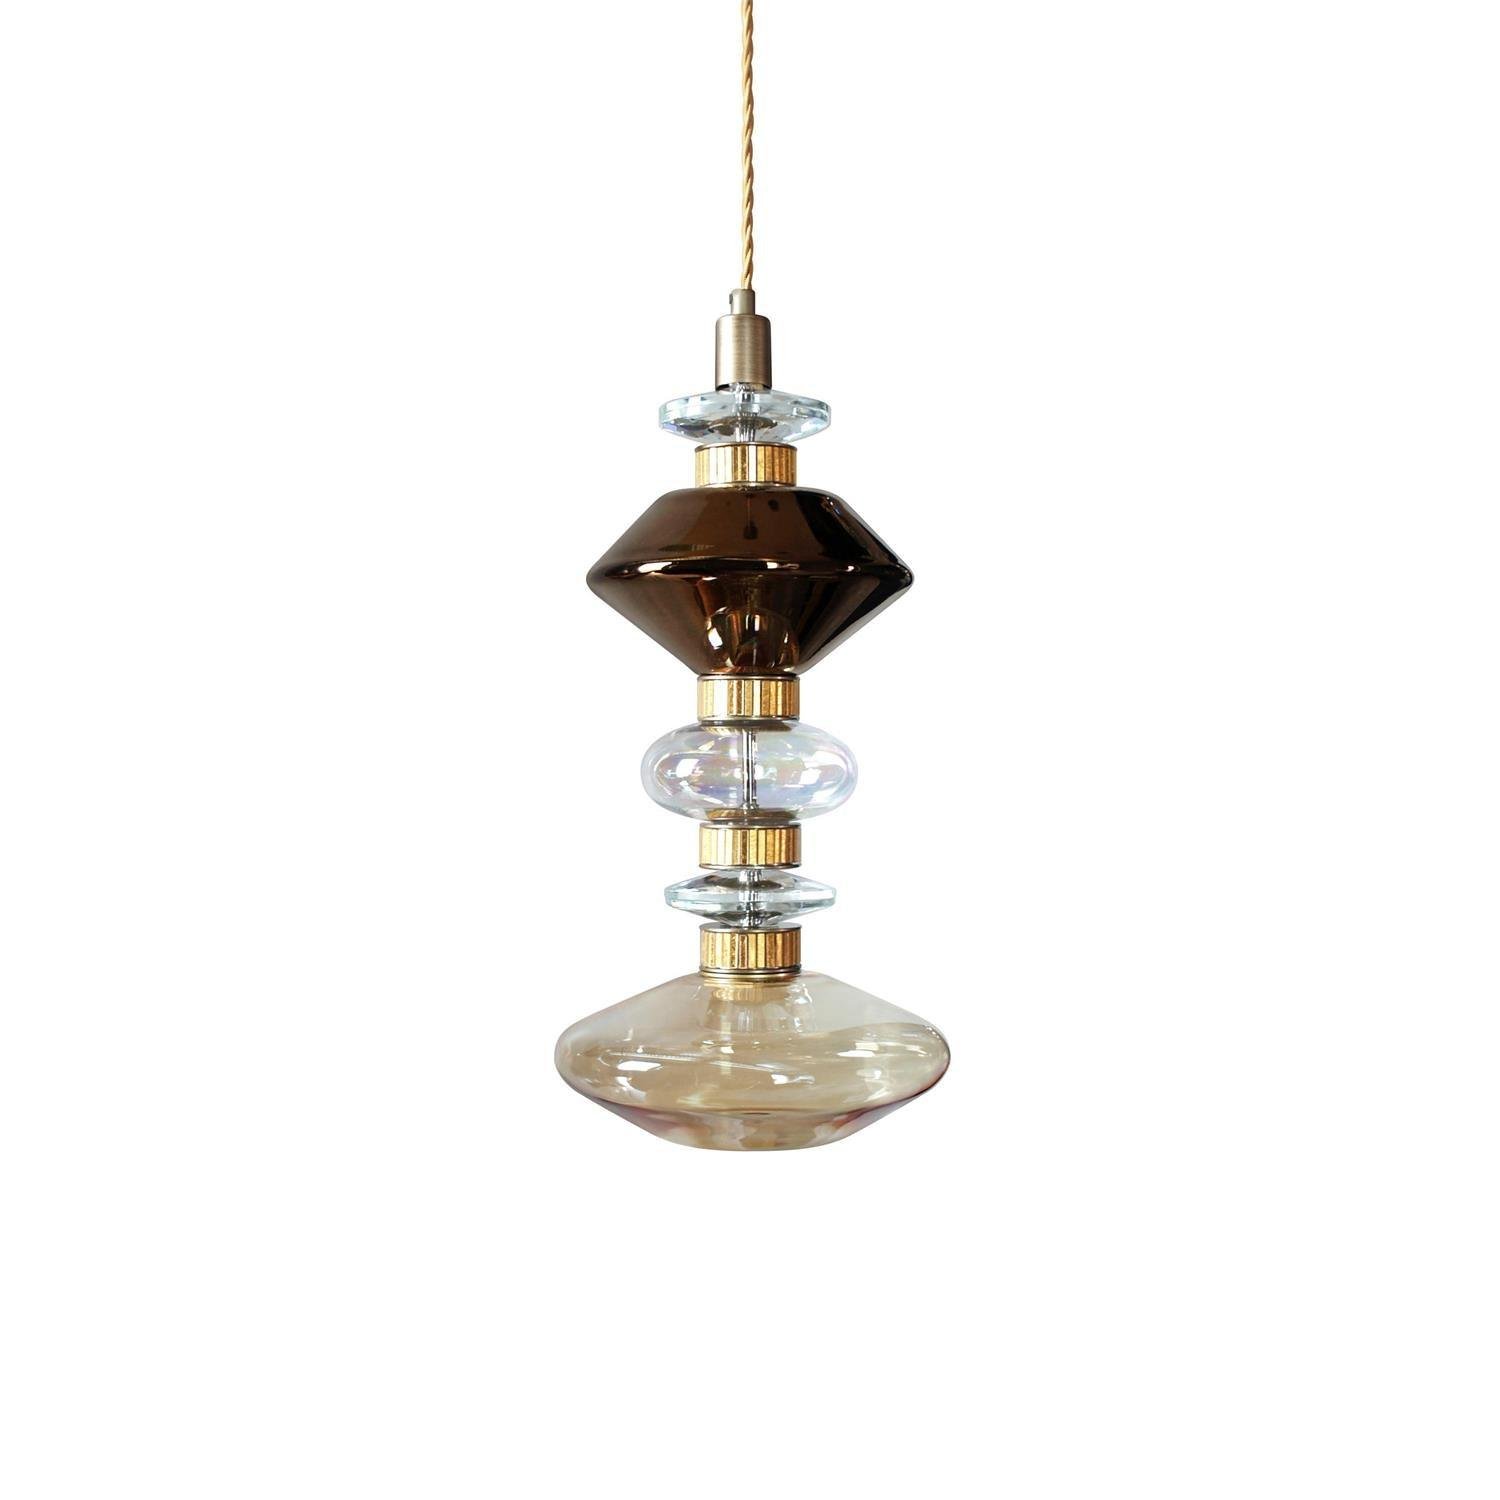 Ballet Pendant Lamp Model F, with a diameter of 9.8 inches and a height of 25.6 inches (25cm x 65cm), boasting a clear finish and emitting a cool light.